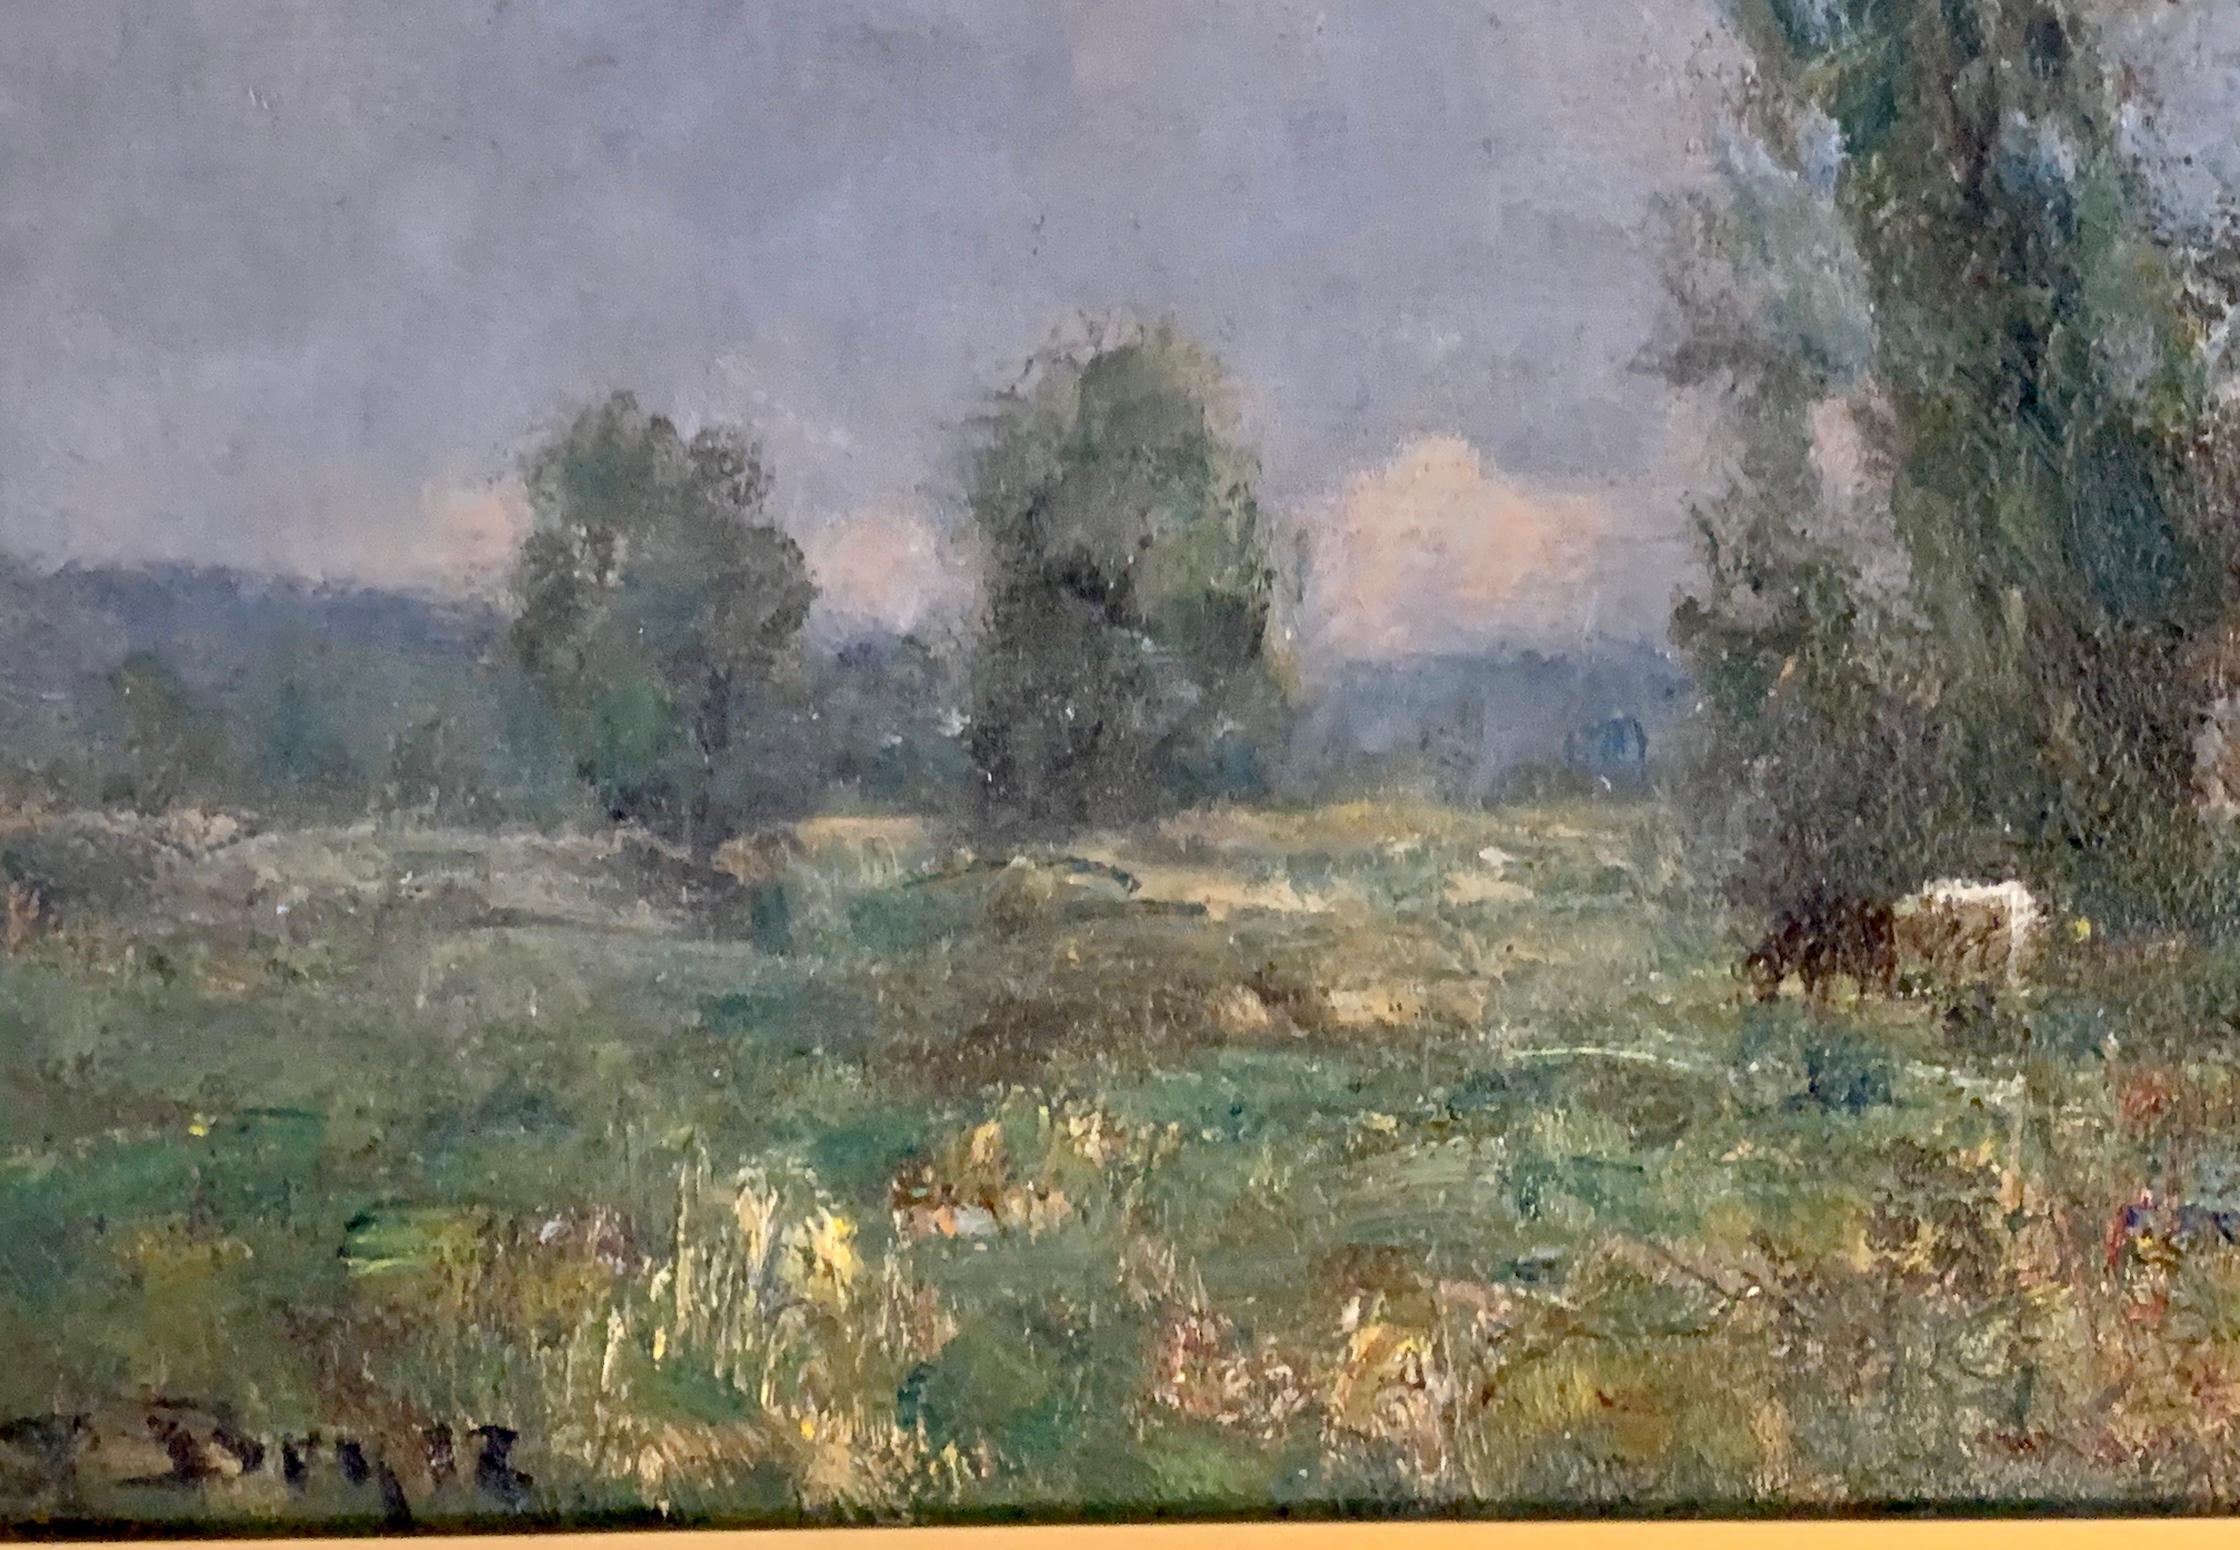 French impressionist landscape, Barbizon forest, with river and cows at Sunset
 Boyle was a pioneering 19th-century British artist inspired by European Impressionist painters.

The influence of the French Barbizon school is very evident in his